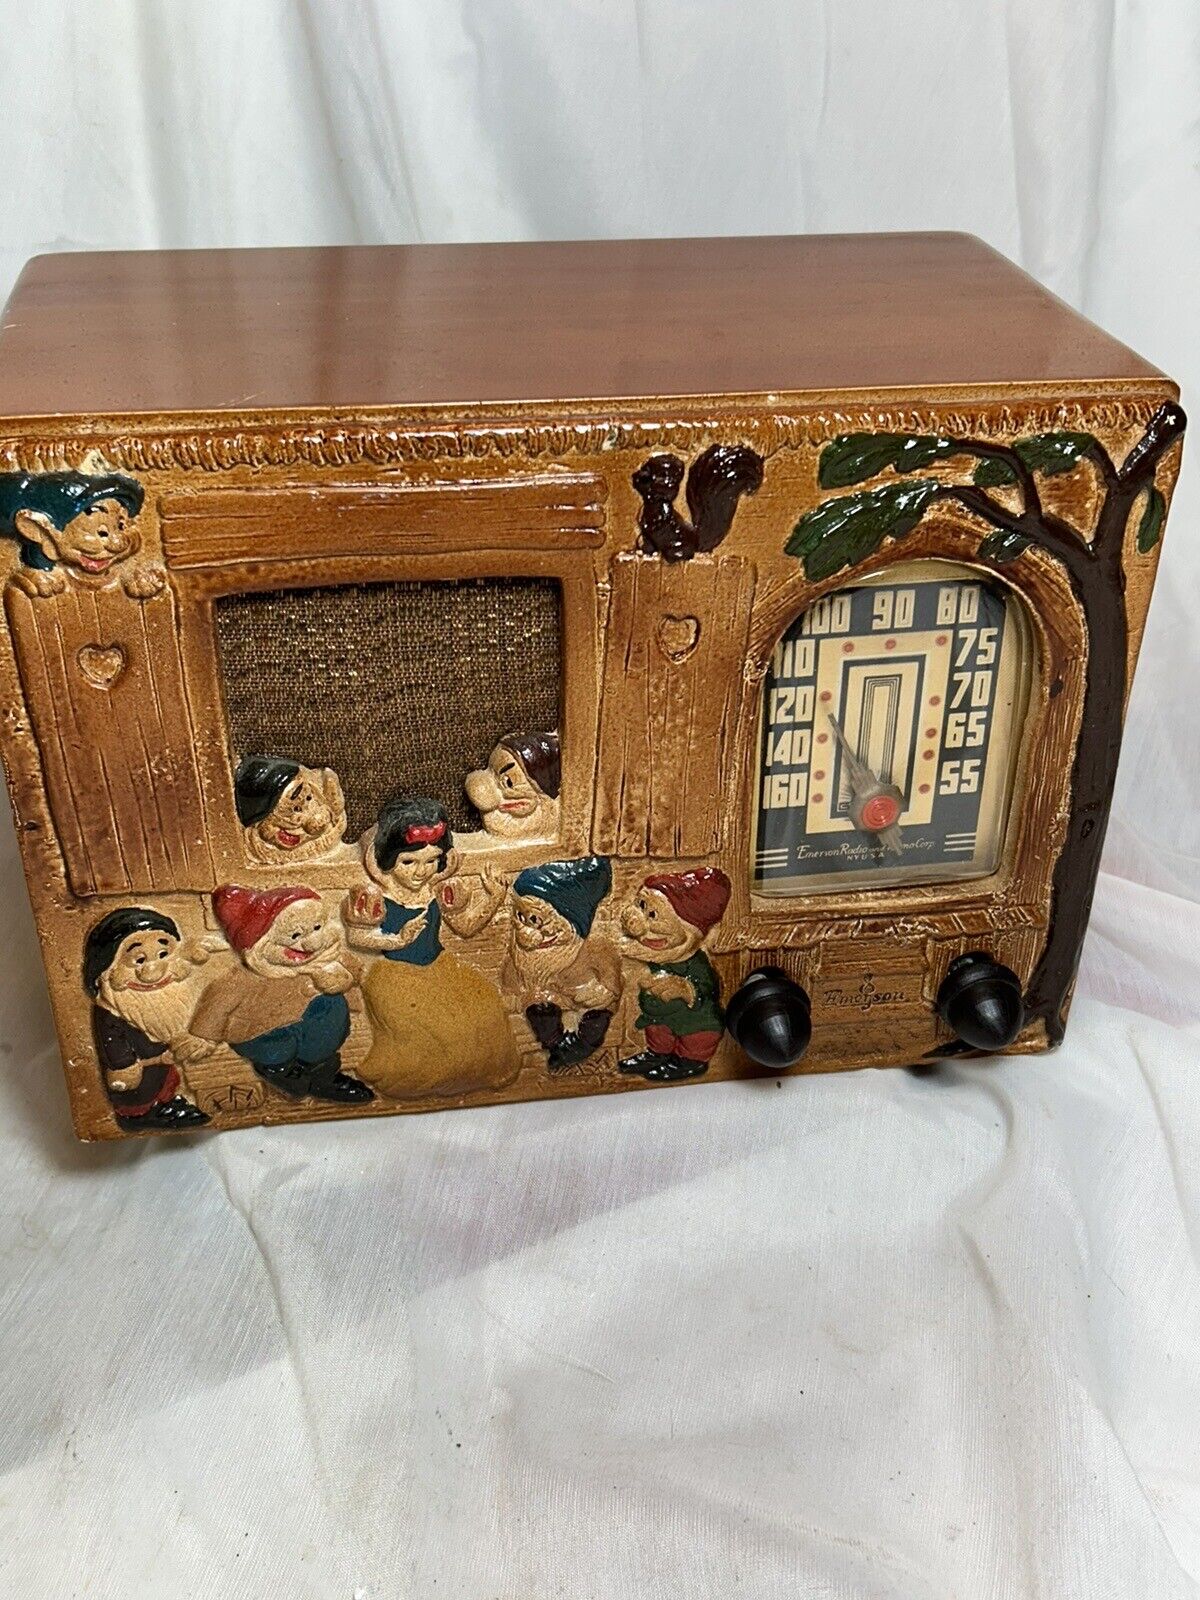 Vintage 1939 Snow White And The Seven Dwarfs Radio Emerson Works And Looks Great